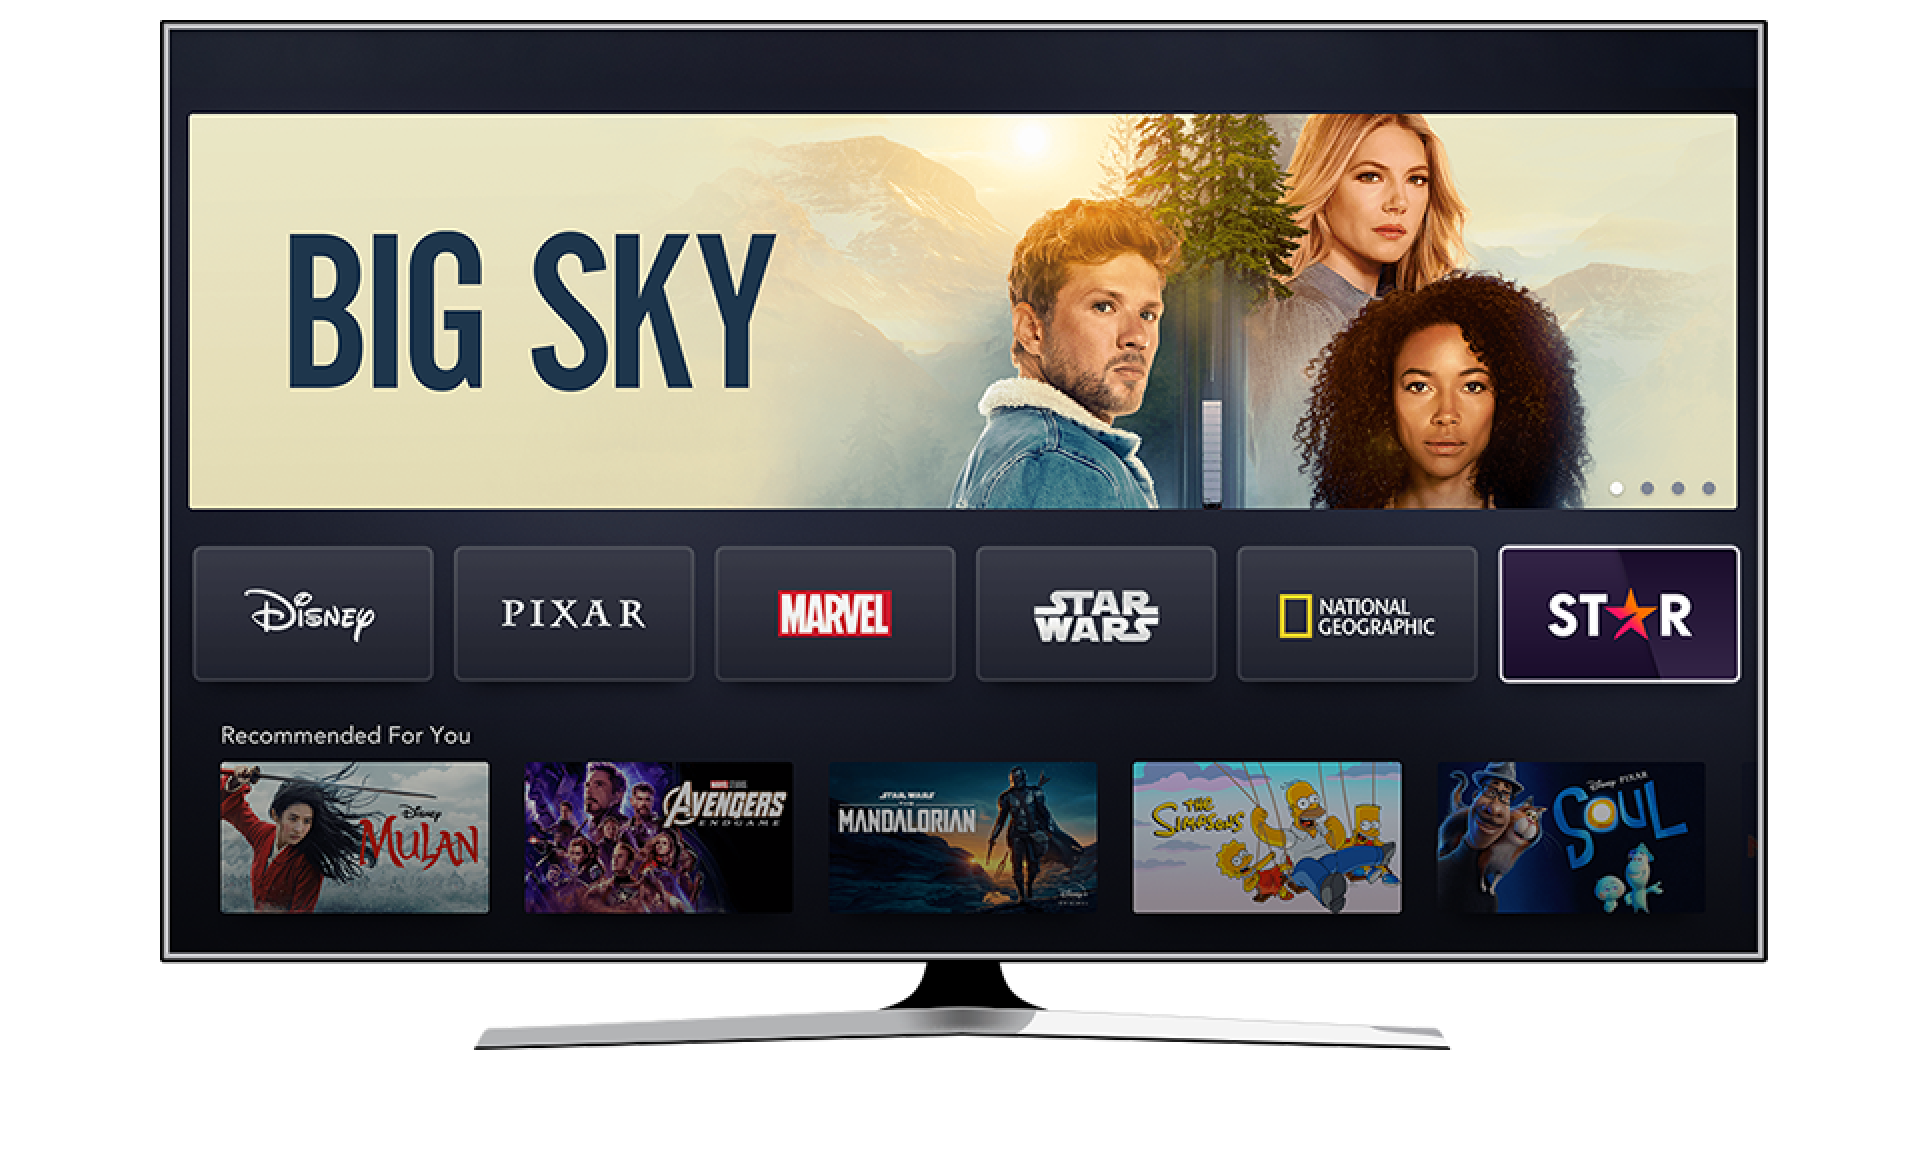 TV screen showing the new Star tile in Disney+